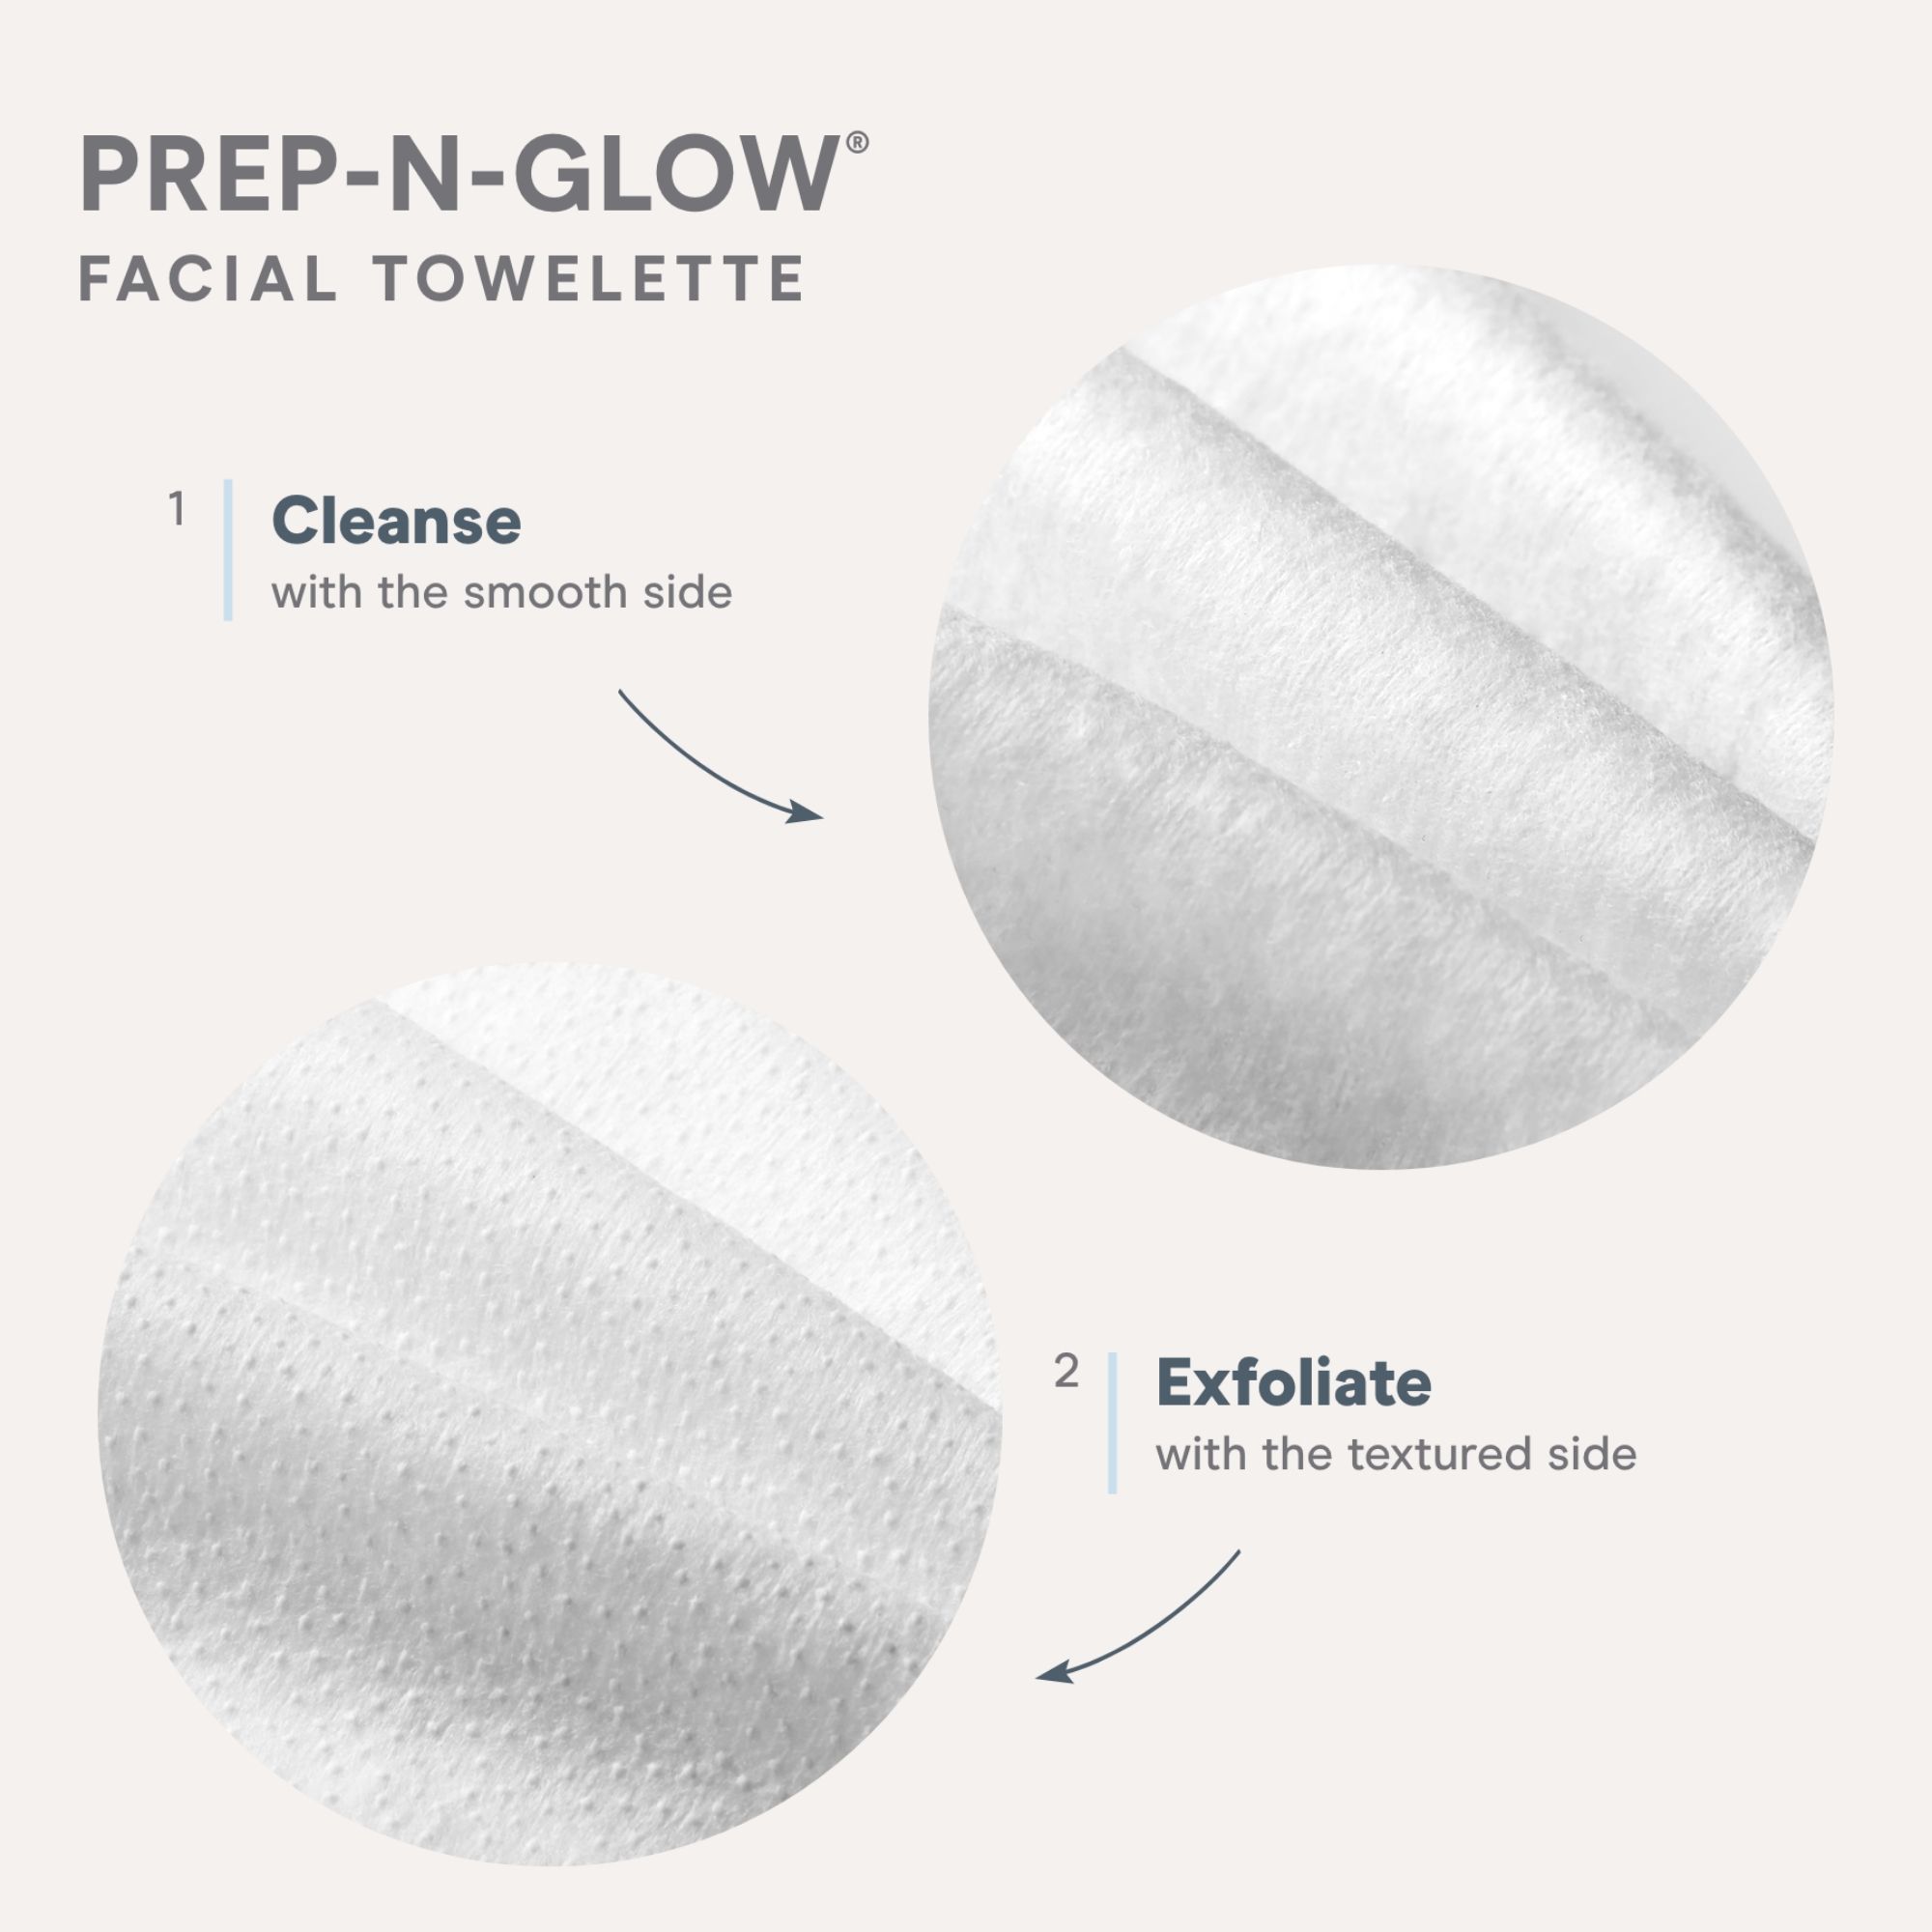 Image 1 -PREP-N-GLOW FACIAL TOWELETTE Cleanse with the smooth side 2 Exfoliate with the textured side